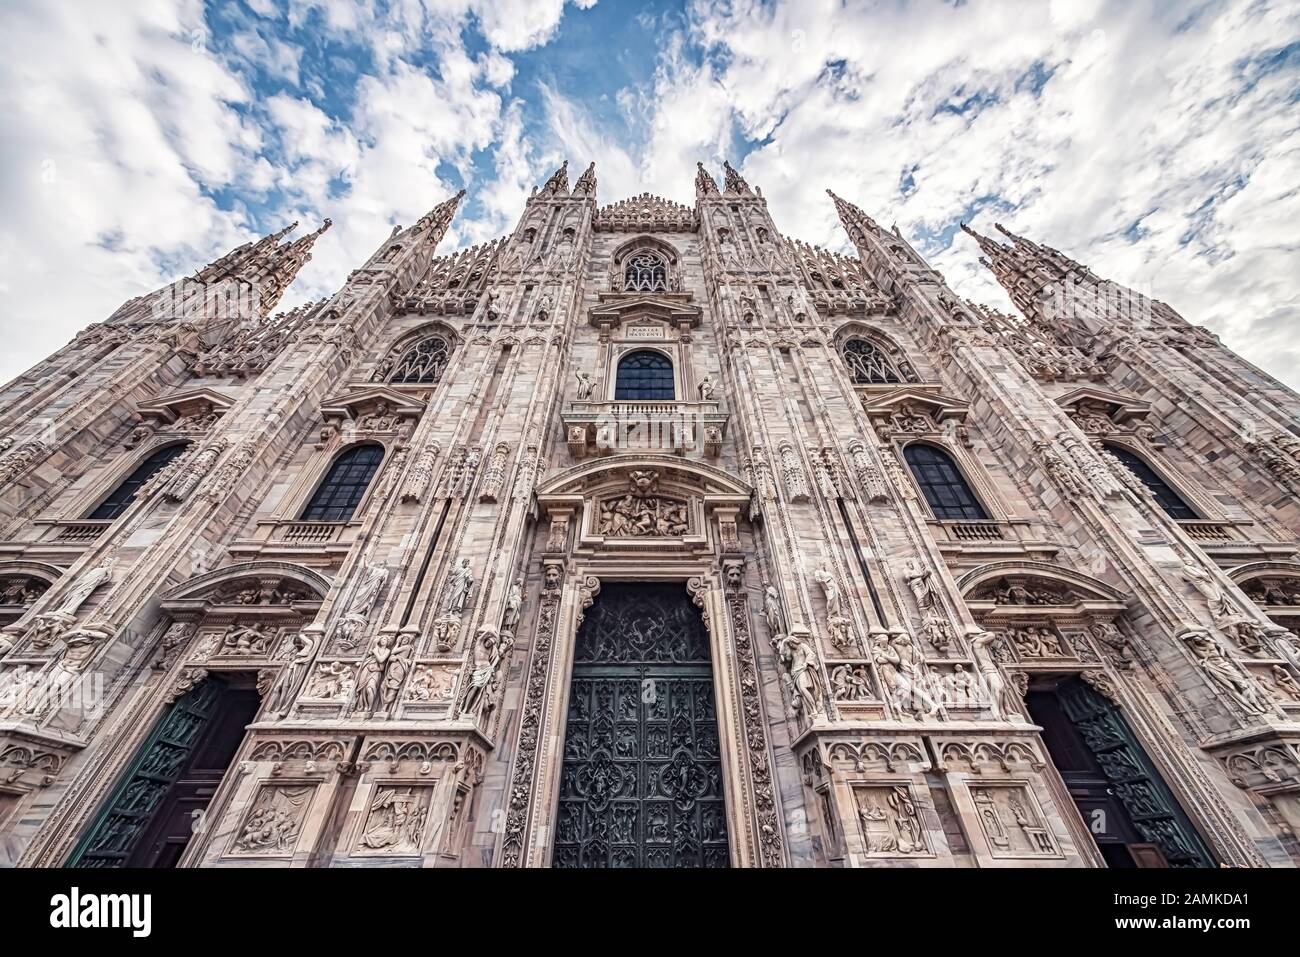 Facade of the cathedral of Milan, Italy Stock Photo